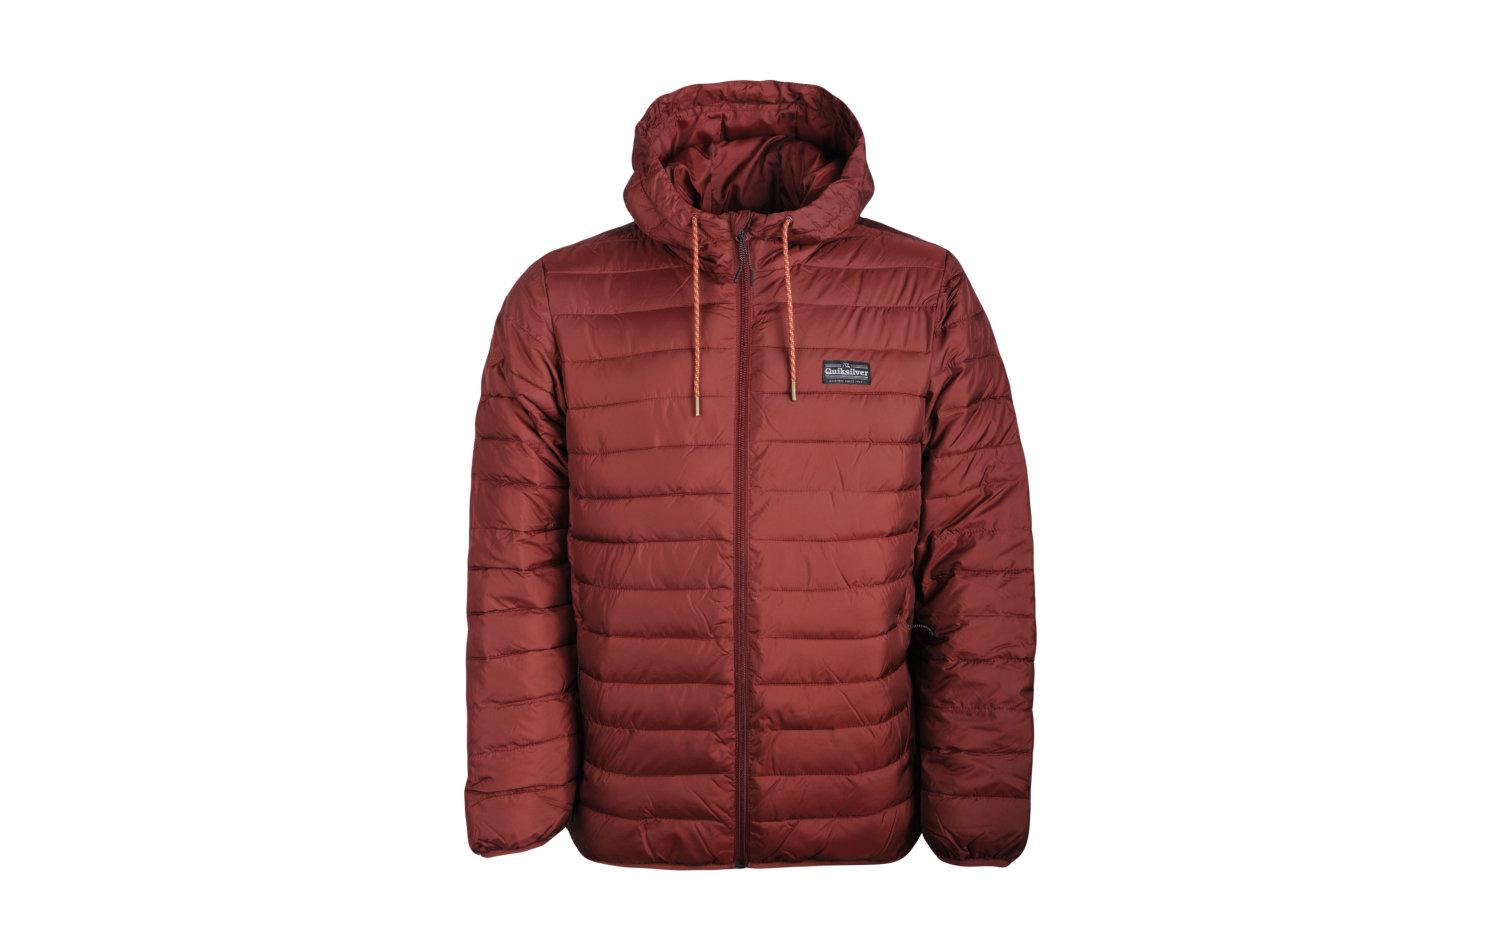 Quiksilver Scaly Hoodie Jacket (EQYJK03504-RSD0)